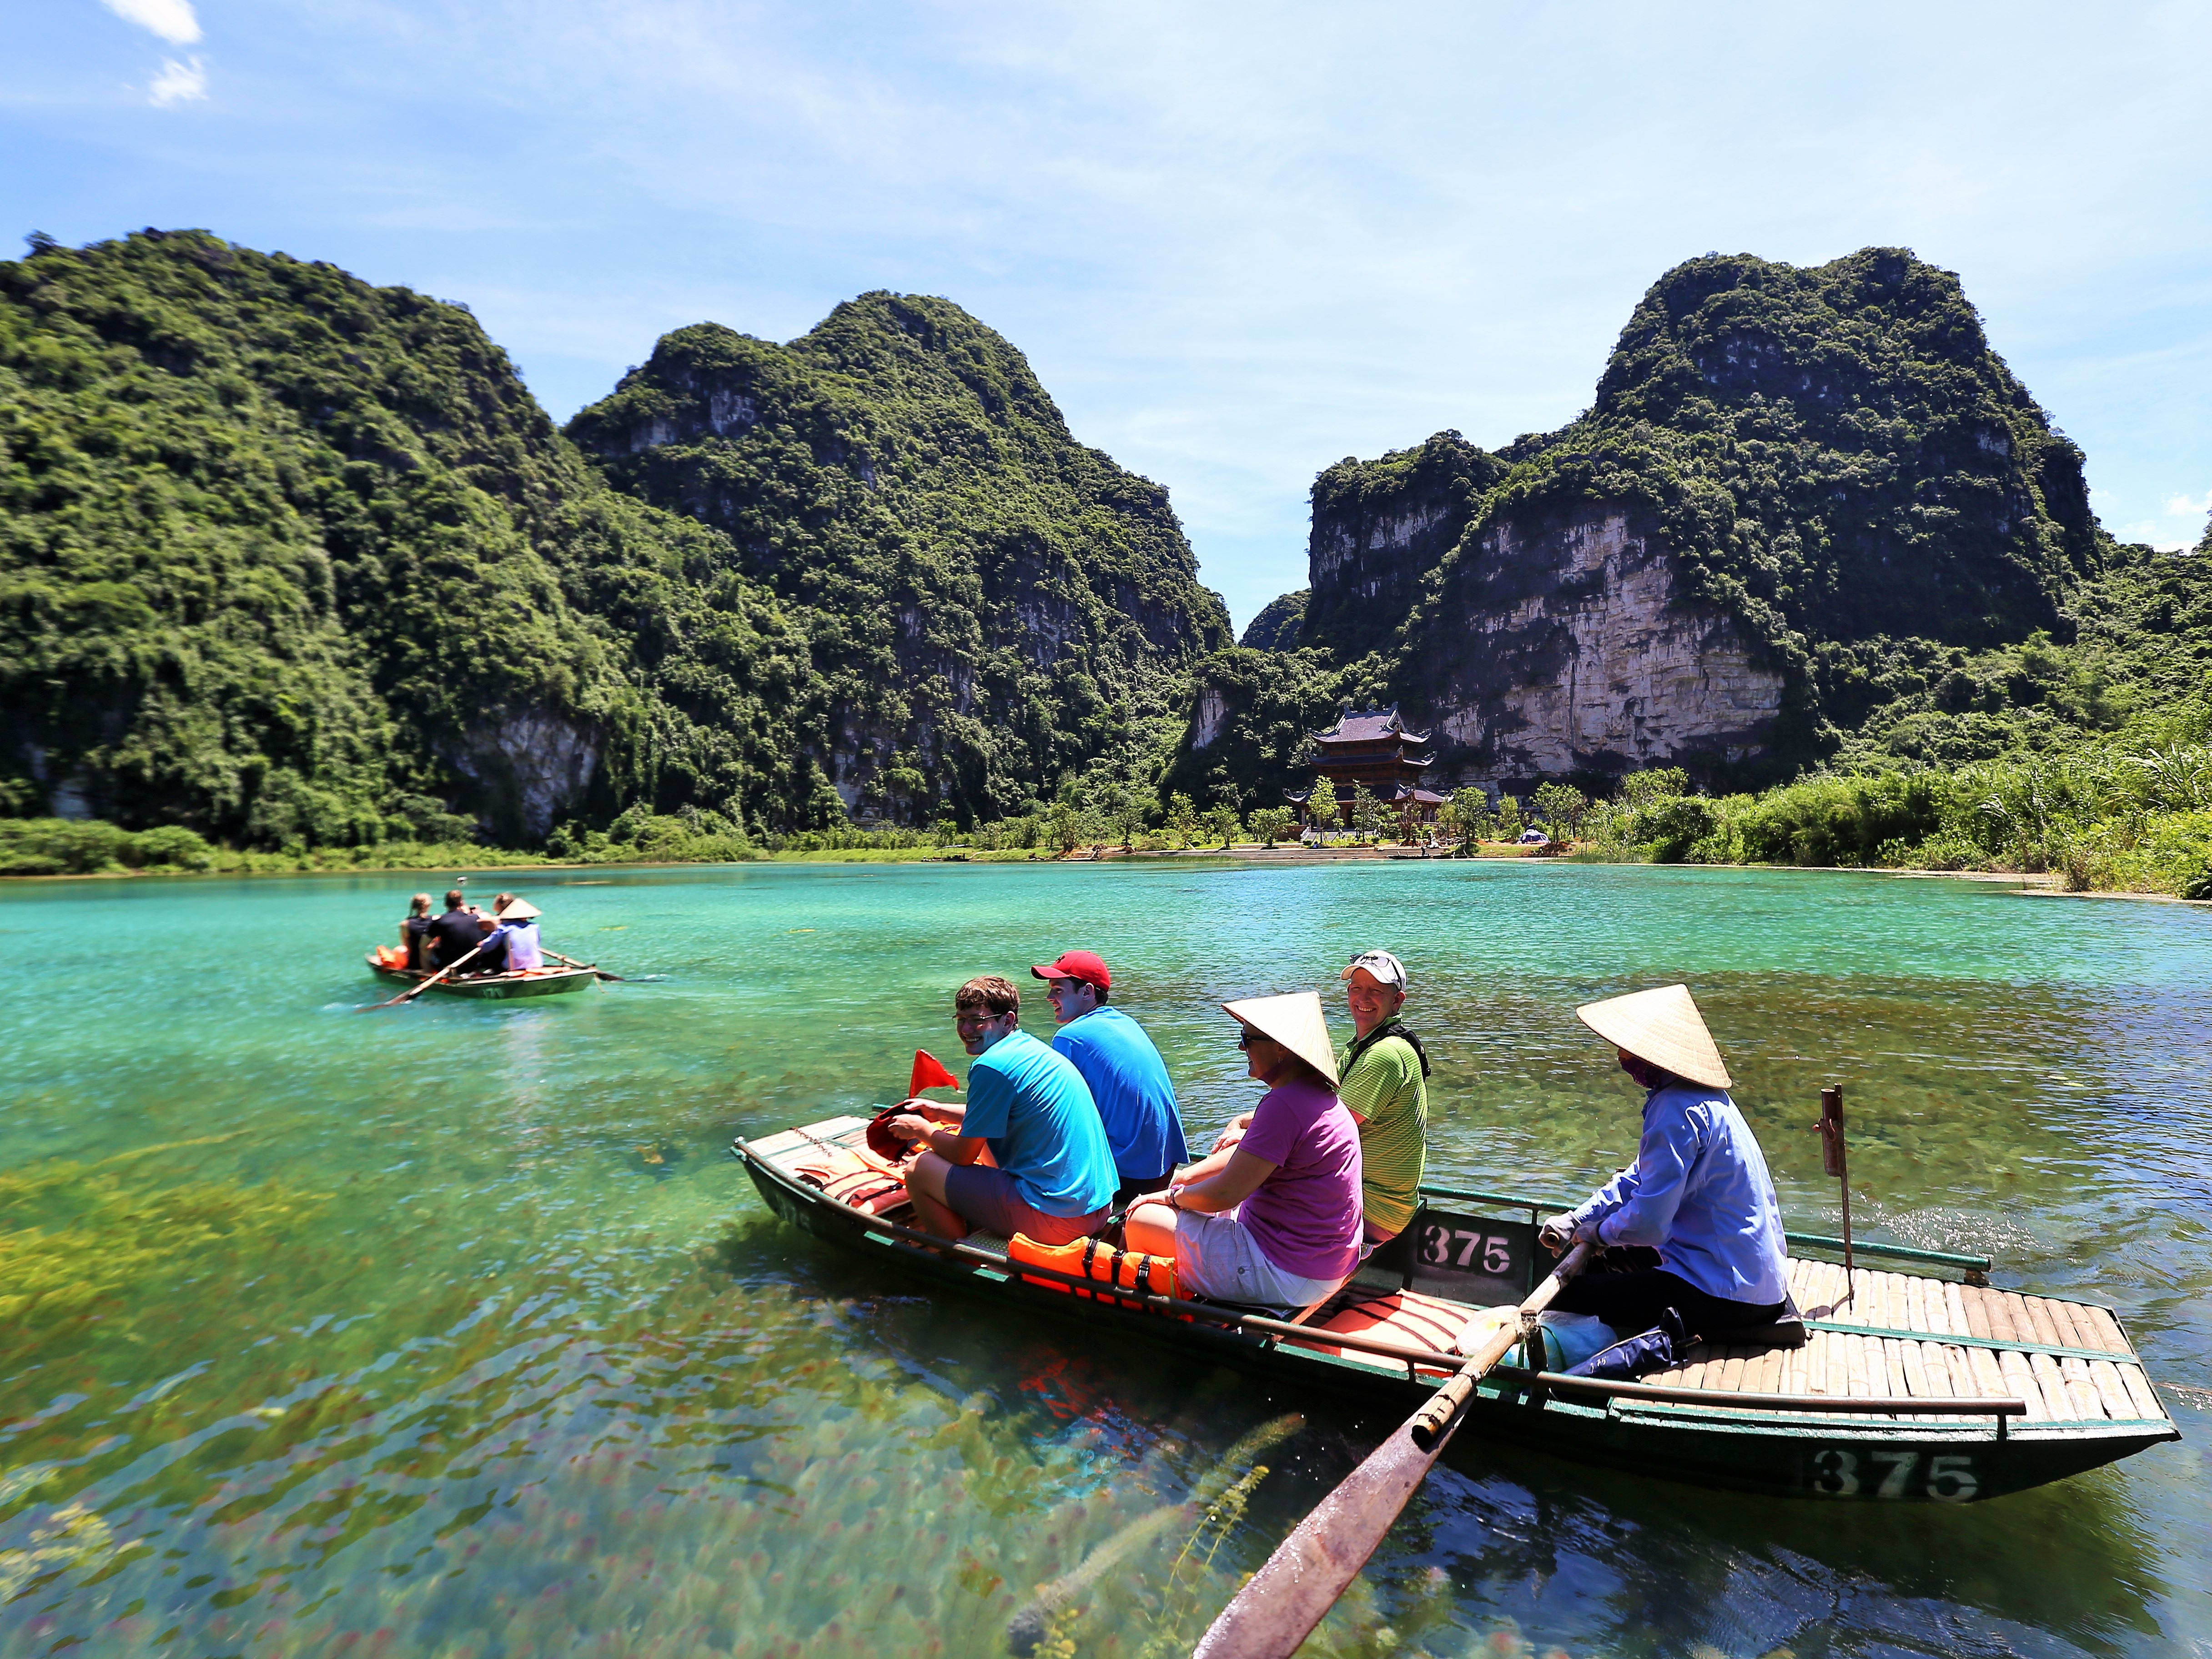 Ninh Binh Citadels and Trang An Day Tour from Hanoi with Cycling and Boat  Ride tours, activities, fun things to do in Hanoi(Vietnam)｜VELTRA